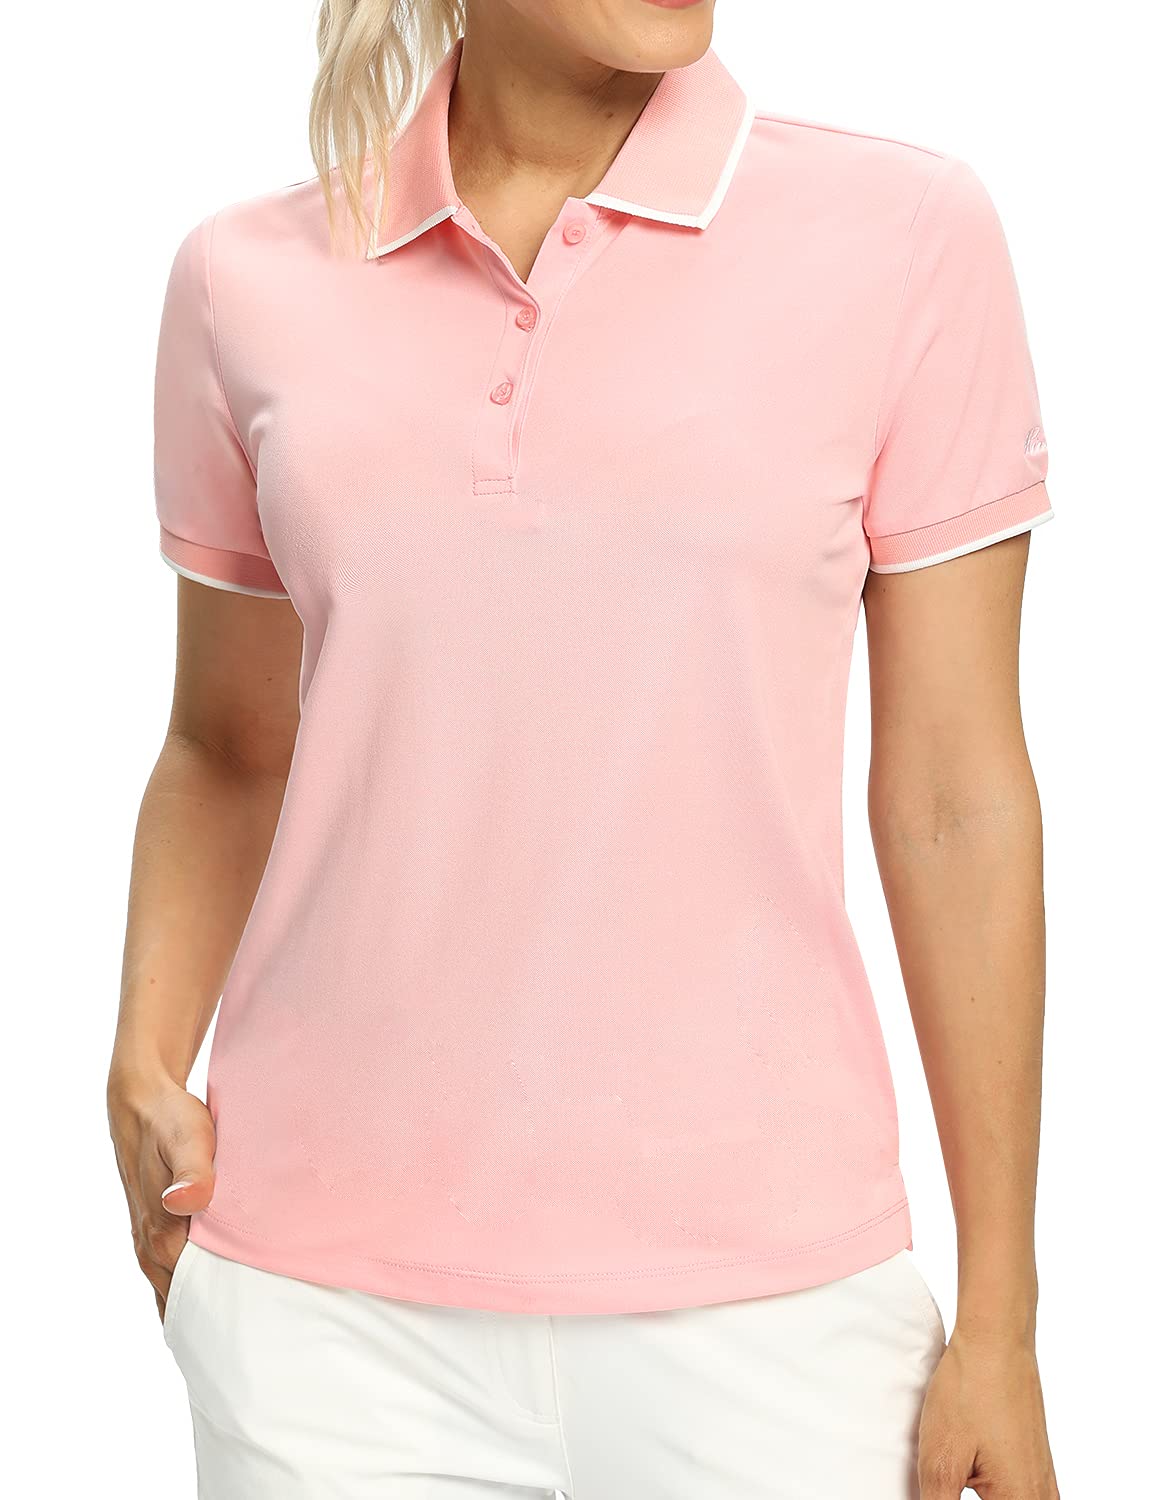 Edge Golf Tops Hiverlay Women Quick-Dry Tennis Color Collared Polo Women Work 50+ Edge Shirts Color Lightweight Shirts UPF Pink-contrast Shirts X-Large for Contrast Daily